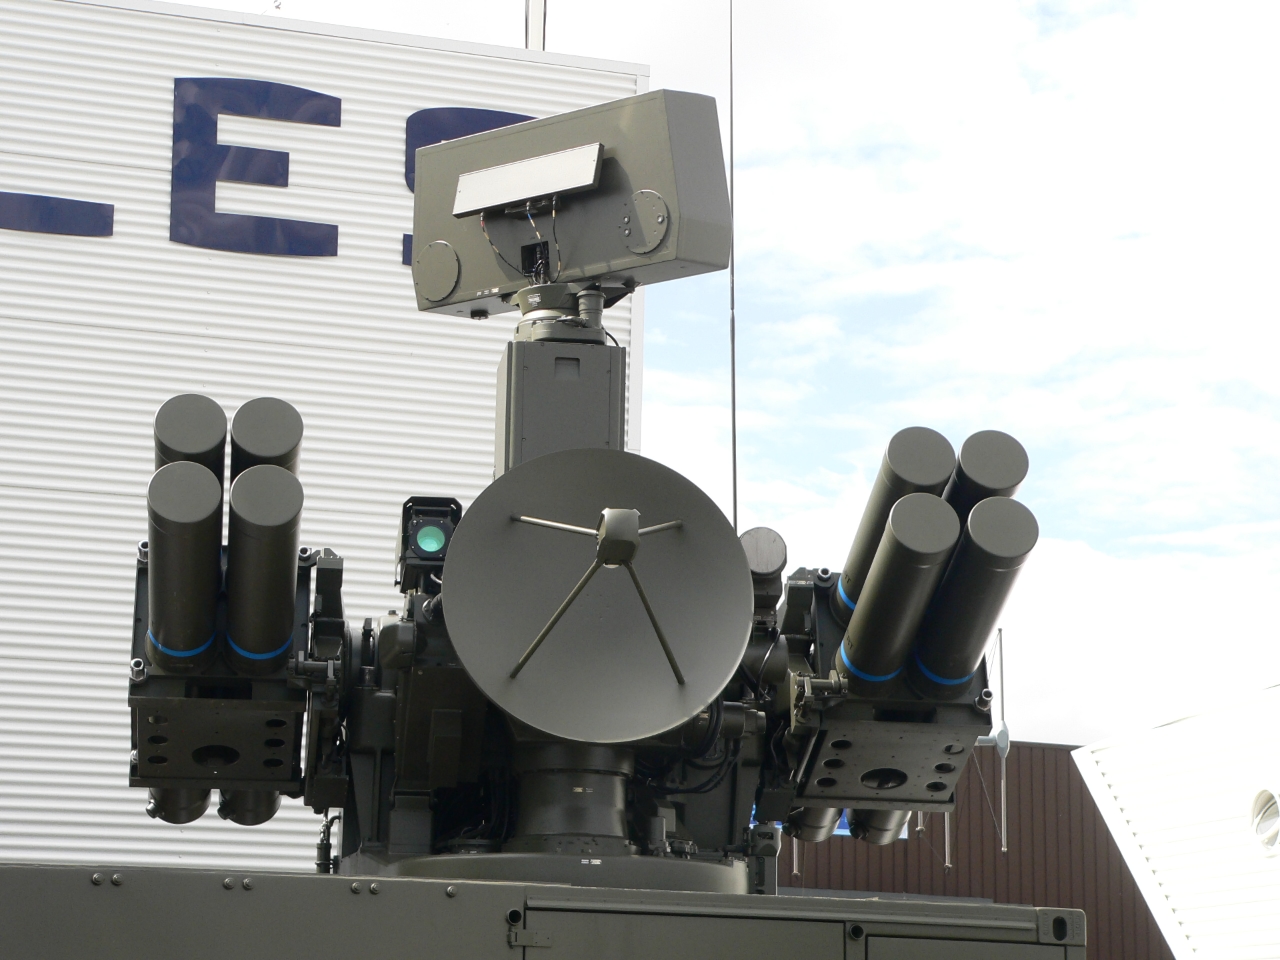 Not only LRU and Caesar air defense guns: France will give Ukraine Crotale air defense systems, they can intercept missiles and planes